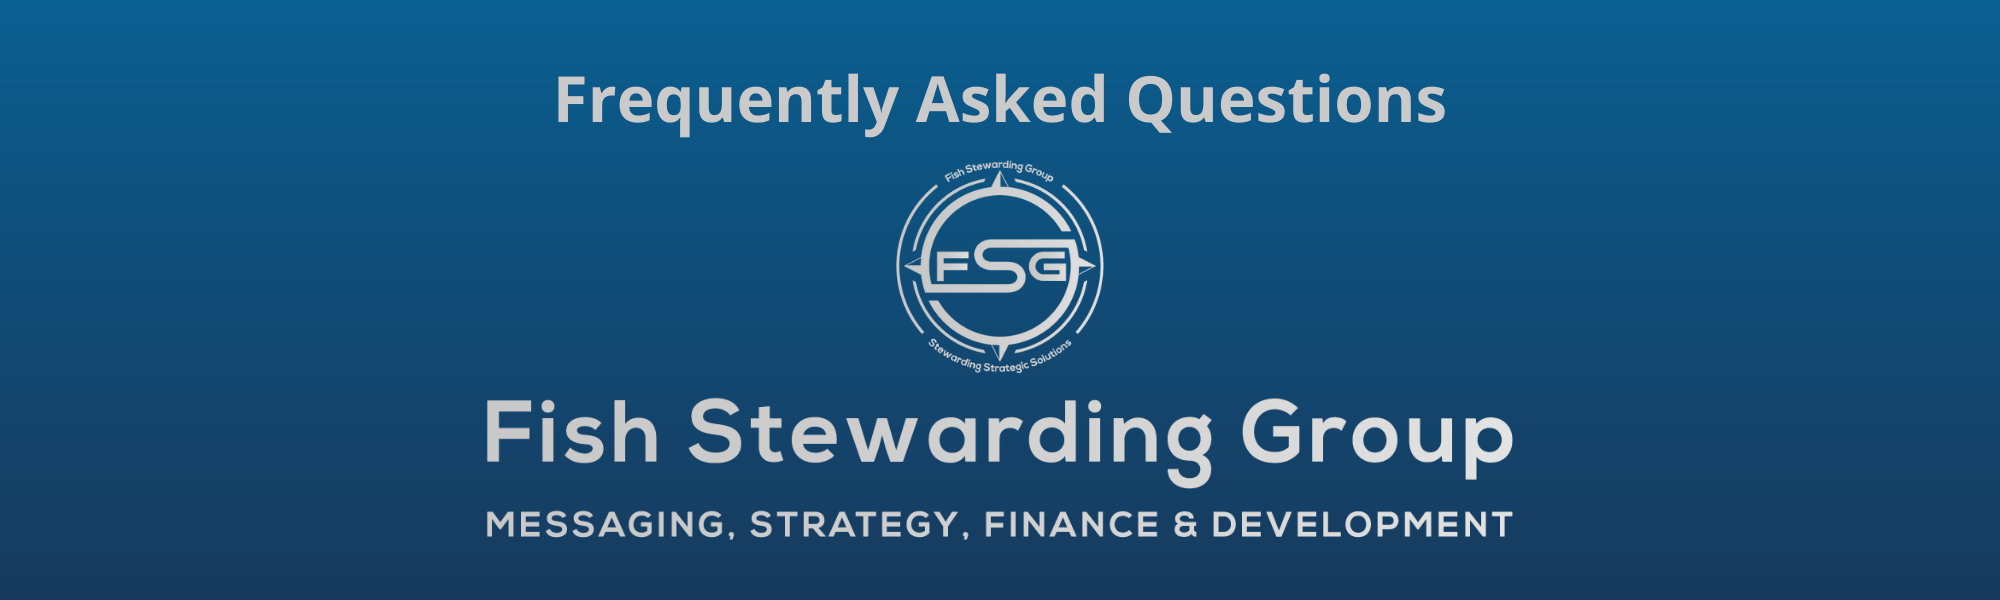 A thin rectangular Footer graphic for the FSG Frequently Asked Questions page and FAQs. The background is a blue gradient color that goes from a dark blue on the bottom to a lighter blue on top. The text in gray on top reads FSG Frequently Asked Questions and FAQs. The text in gray on the bottom center reads: Fish Stewarding Group and beneath that, the text reads Messaging, Strategy, Finance and Development. In the center above the text is the FSG logo in gray. The logo has the letters FSG in the middle with a circle with four pointed arrows facing north, south, east and west with the S connected to that circle. Four rounded lines make the next circle of the circle and the last layer is a thin circle with the text on the Bottom that reads Stewarding Strategist Solutions and on top, the text reads Fish Stewarding Group.